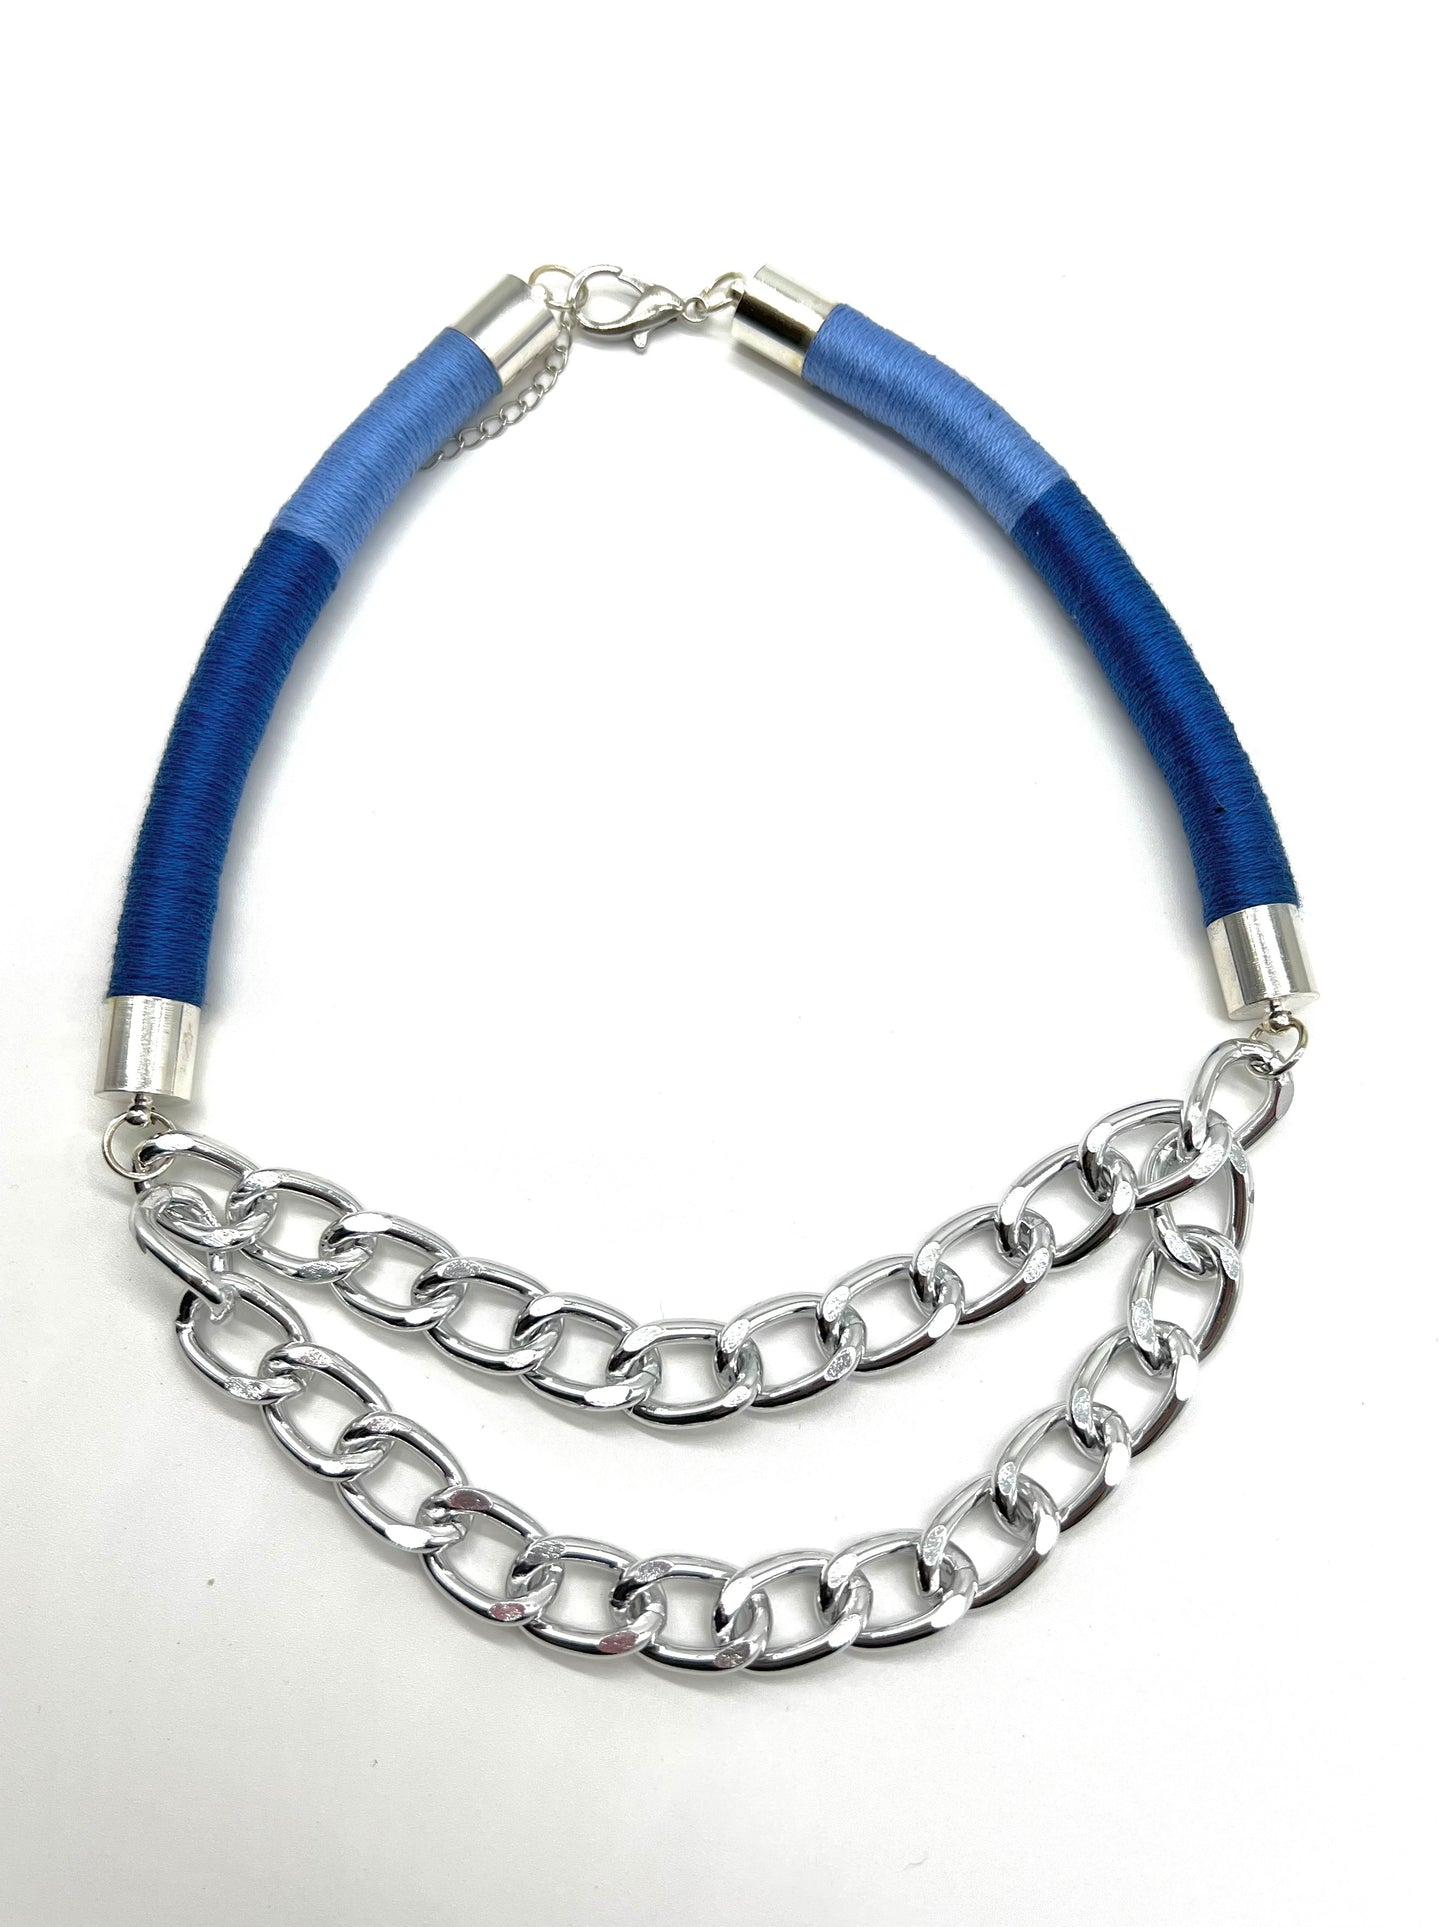 DOUBLE CHAIN NECKLACE